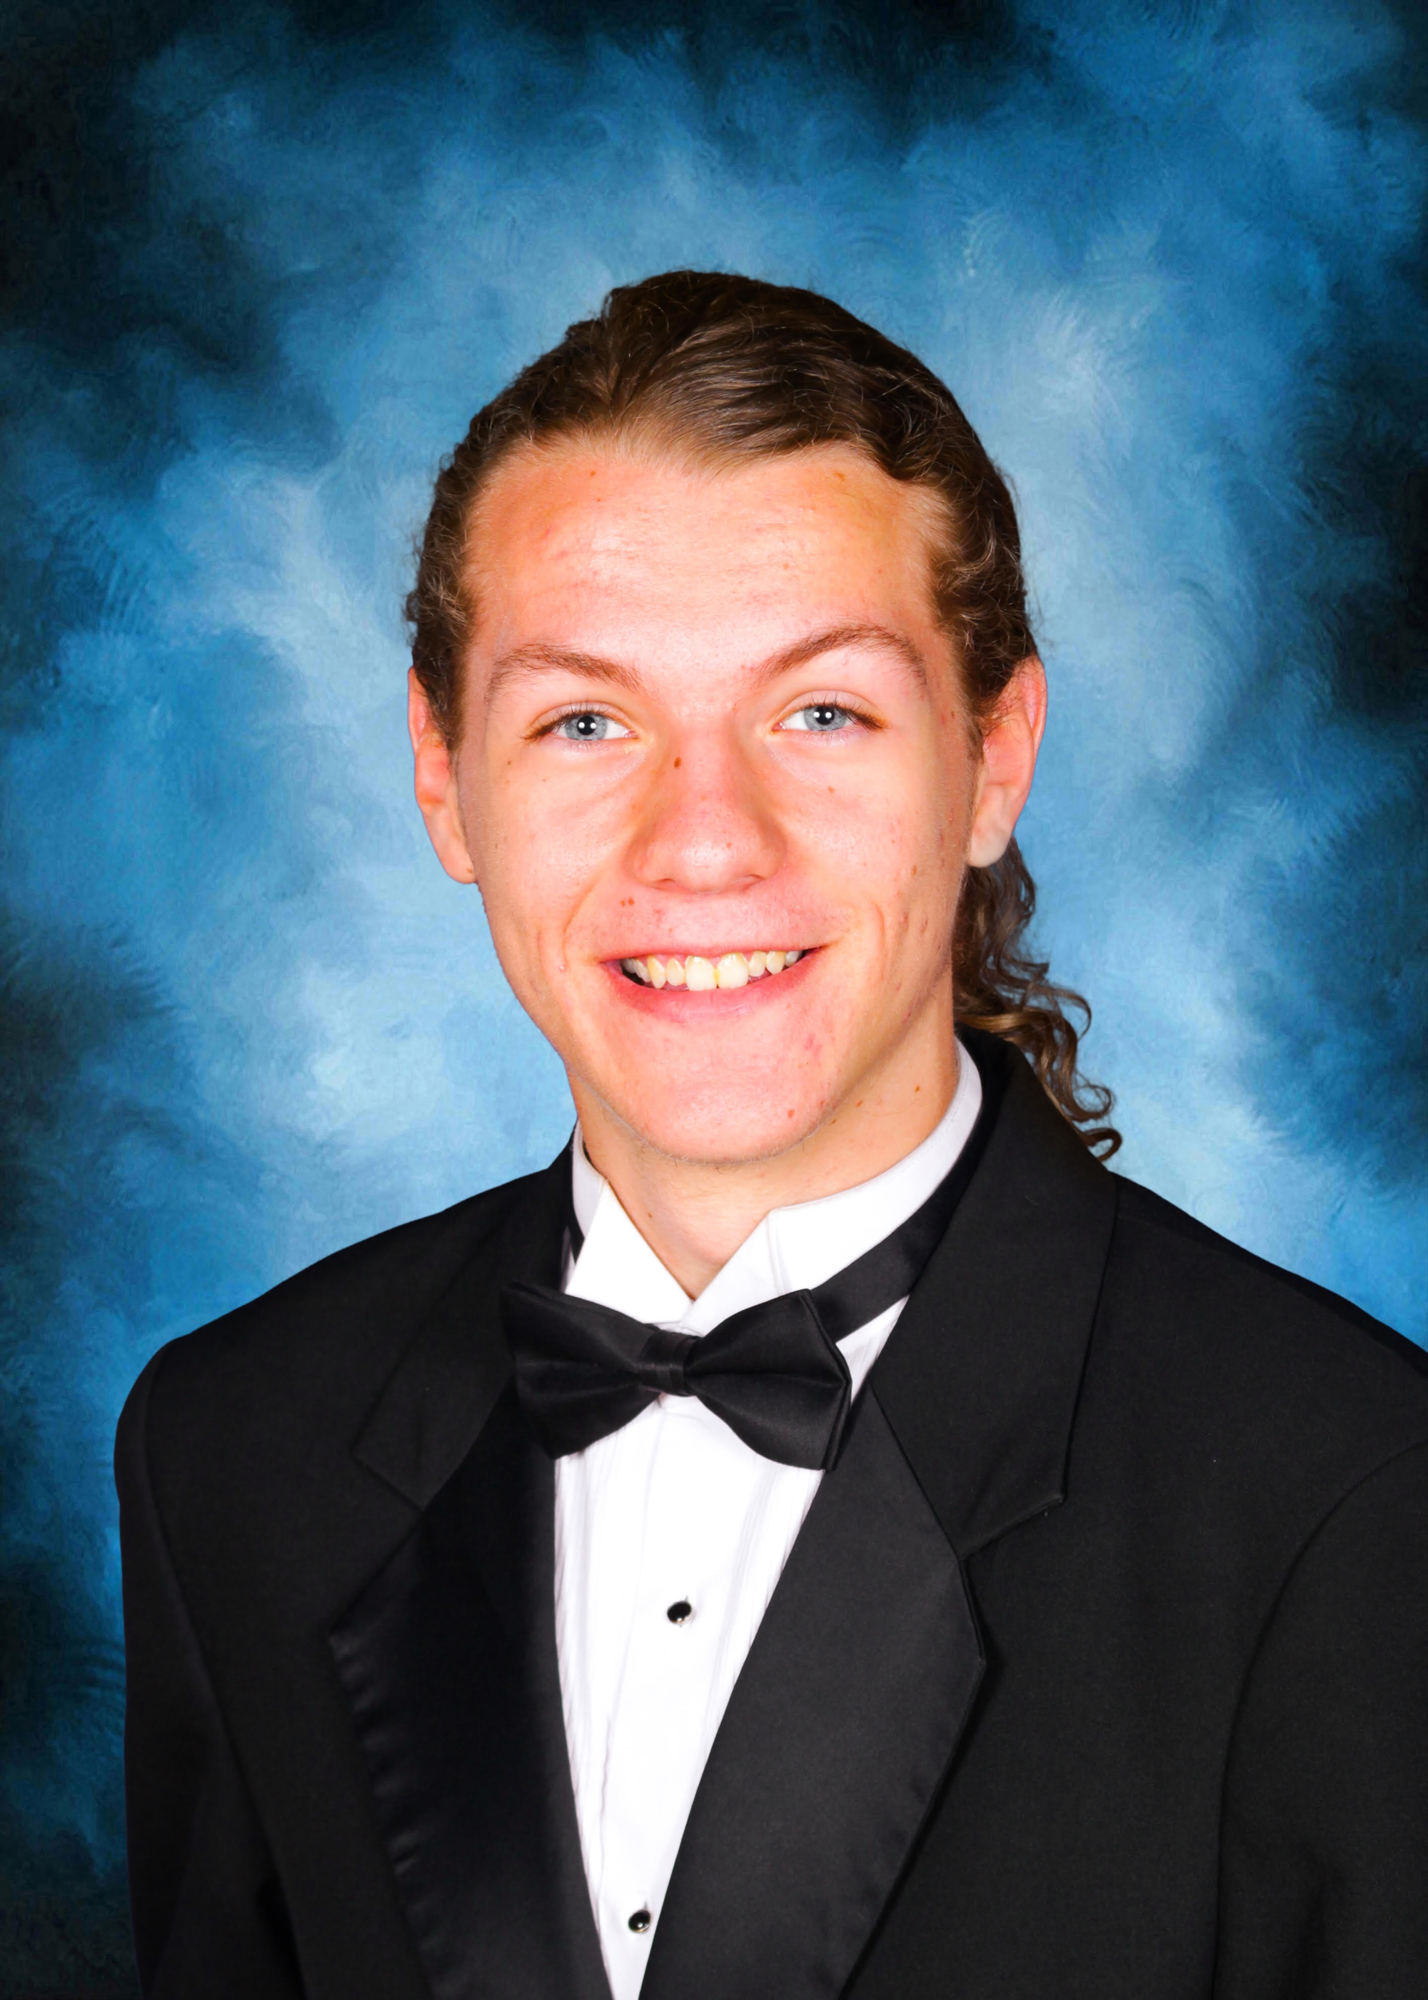 The Palm Coast Arts Foundation awarded Travis Maynard, a graduating senior from Flagler Palm Coast High School, a $1,000 scholarship in pursuit of his college aspirations to major in music. Courtesy photo